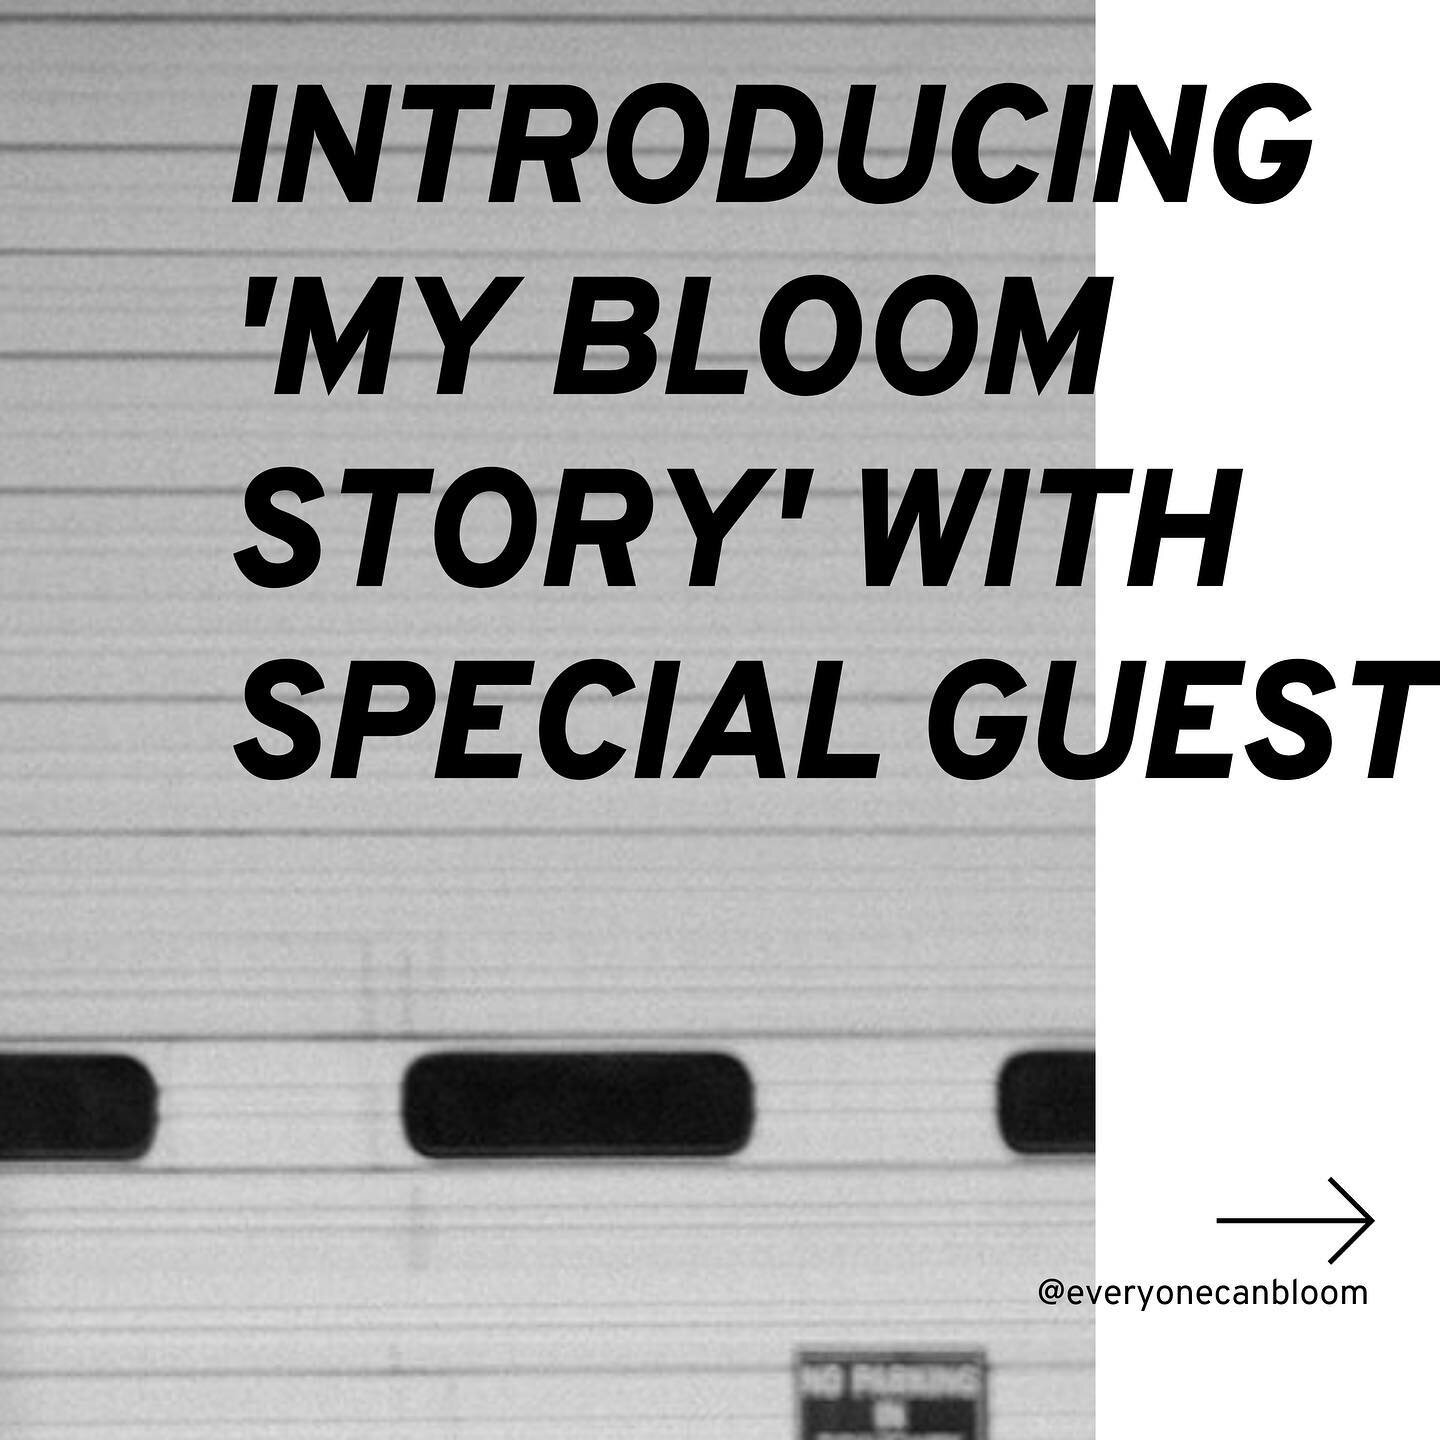 Introducing &lsquo;My Bloom Story&rsquo; ✍️ 

The platform that gives you the opportunity to share your story in your own words.

&mdash; &mdash; &mdash;

Tonight&rsquo;s special guest is Bianca Romano, writer of My Bloom Story&rsquo;s feature story.